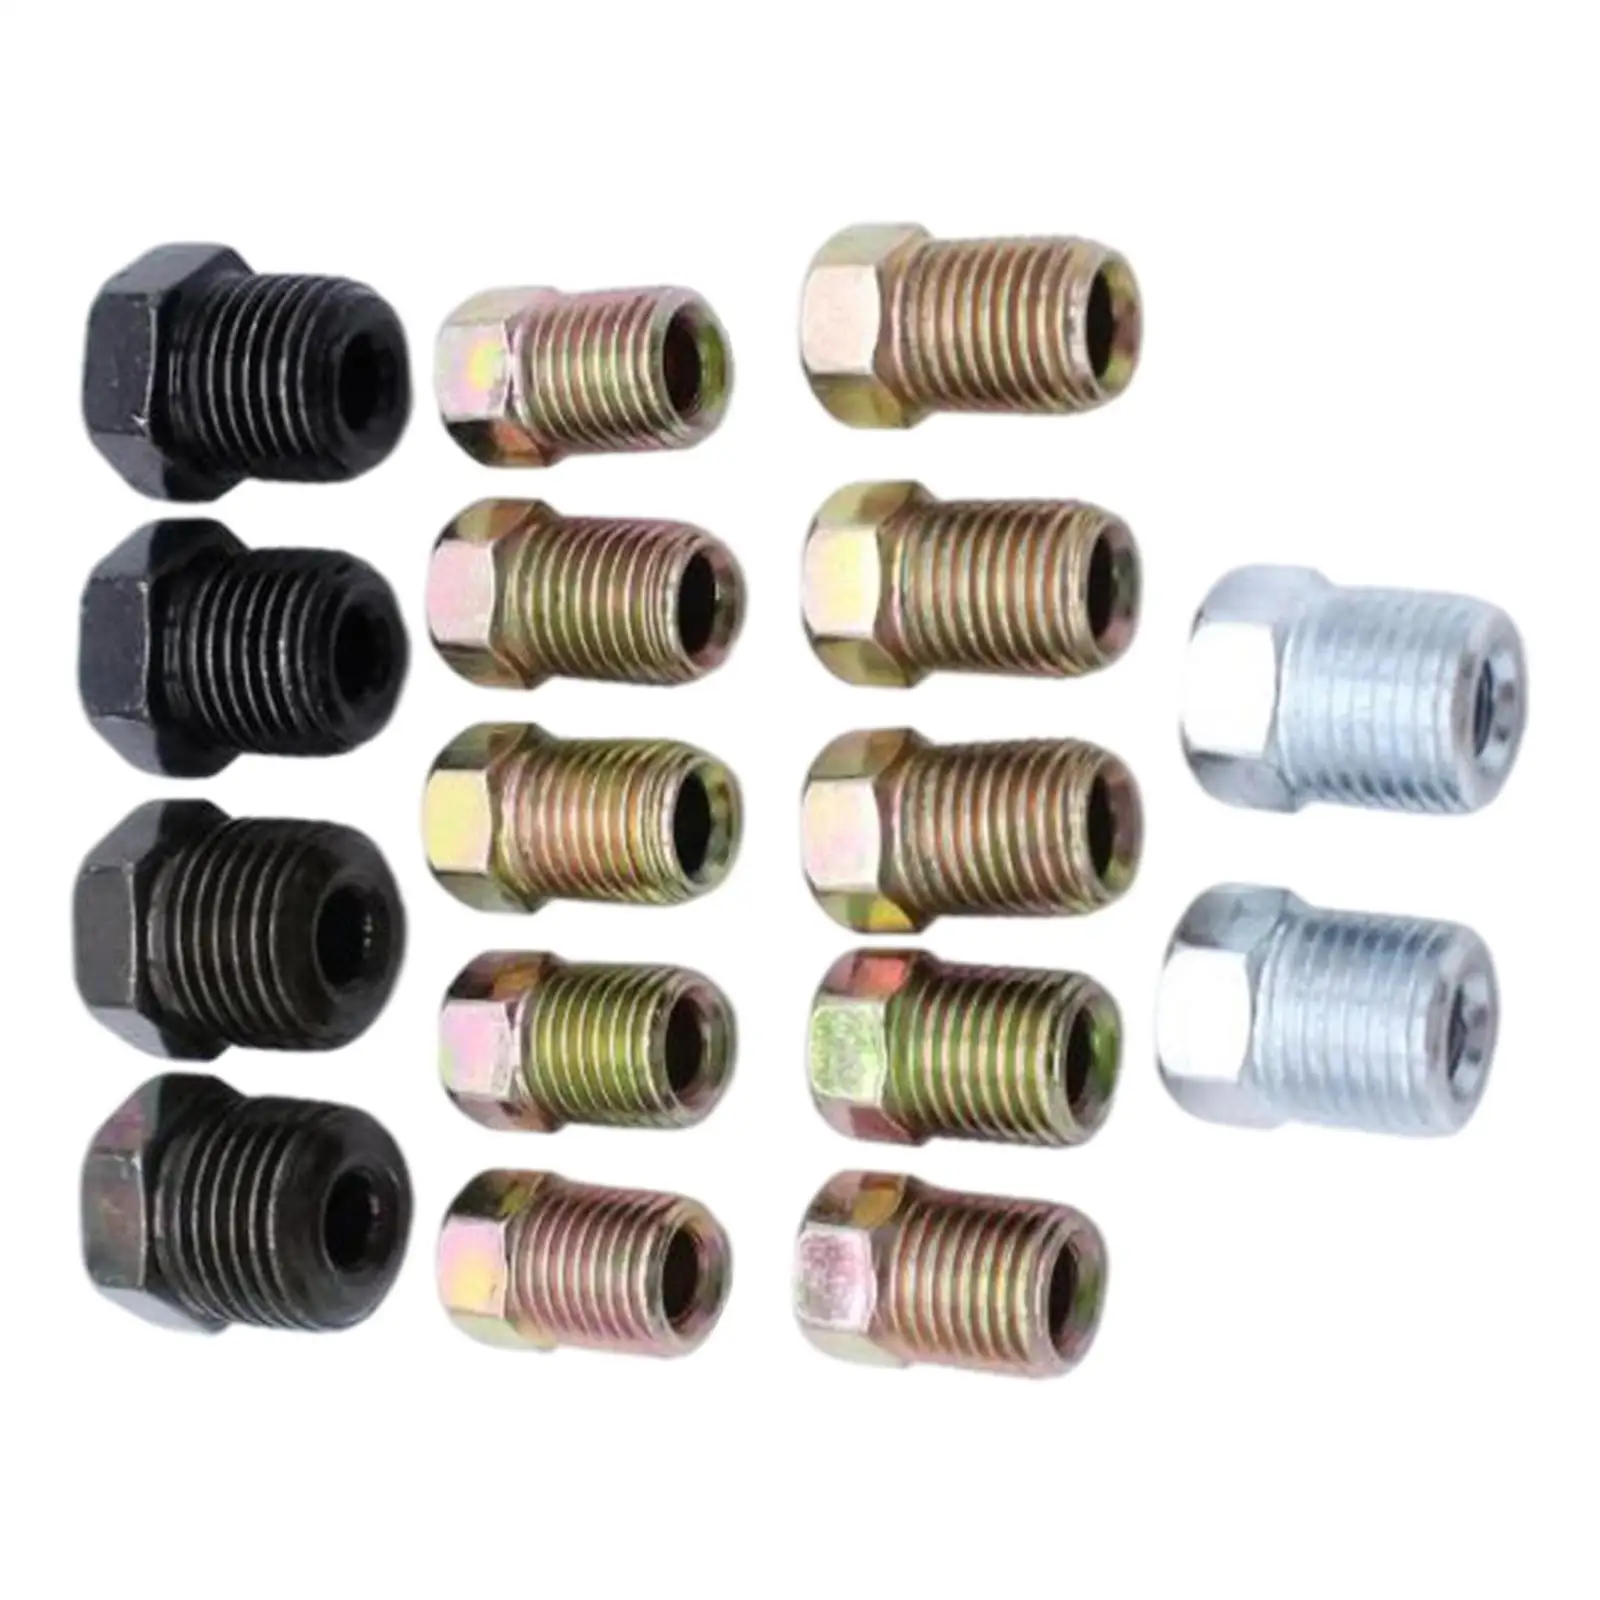 16Pcs Inverted  Tube Nuts 2x 7/16-2x -24 2x 9/16-18 Threads Nuts Fit for 3/16 Tube Brake Line  Accessories